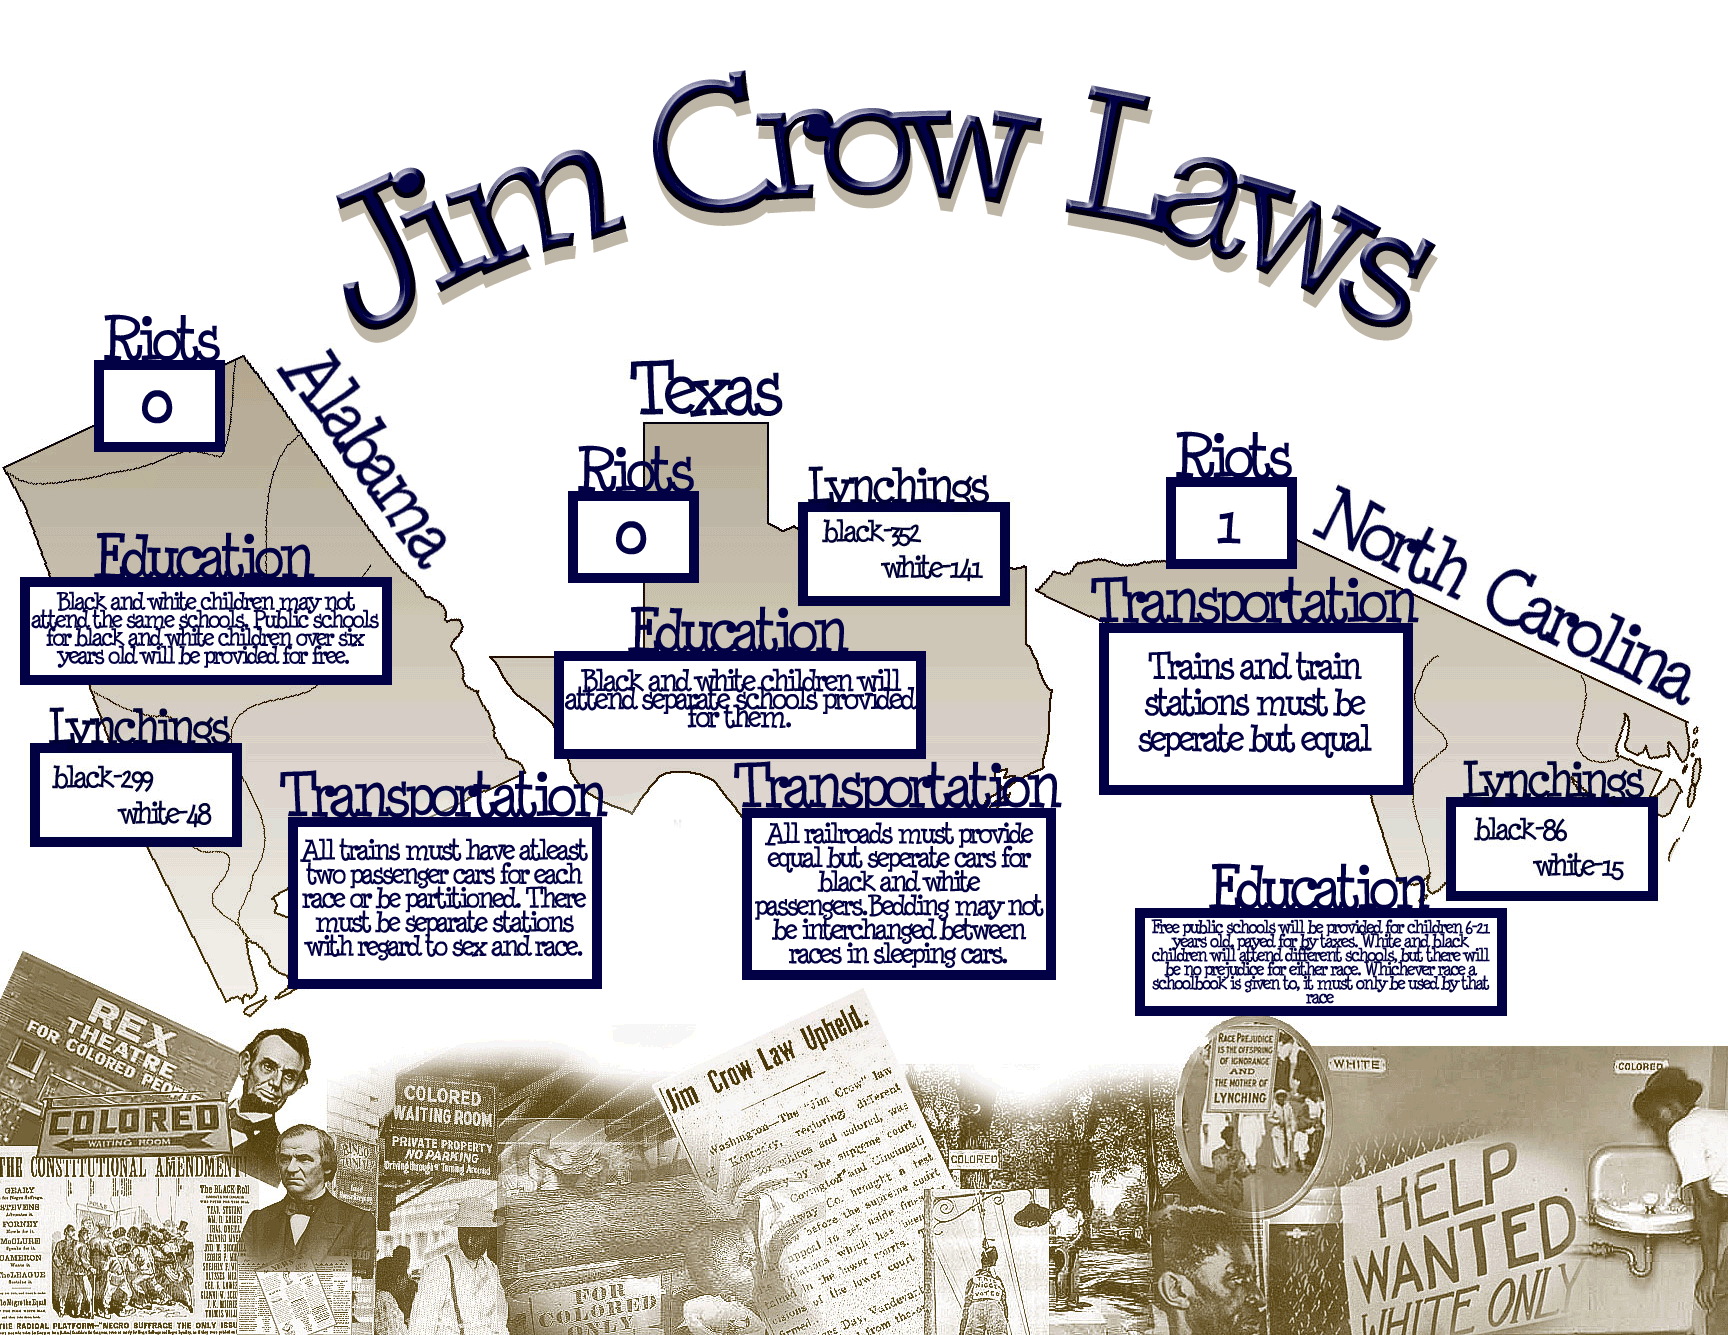 A report on the jim crow law of racial segregation in the united states of america